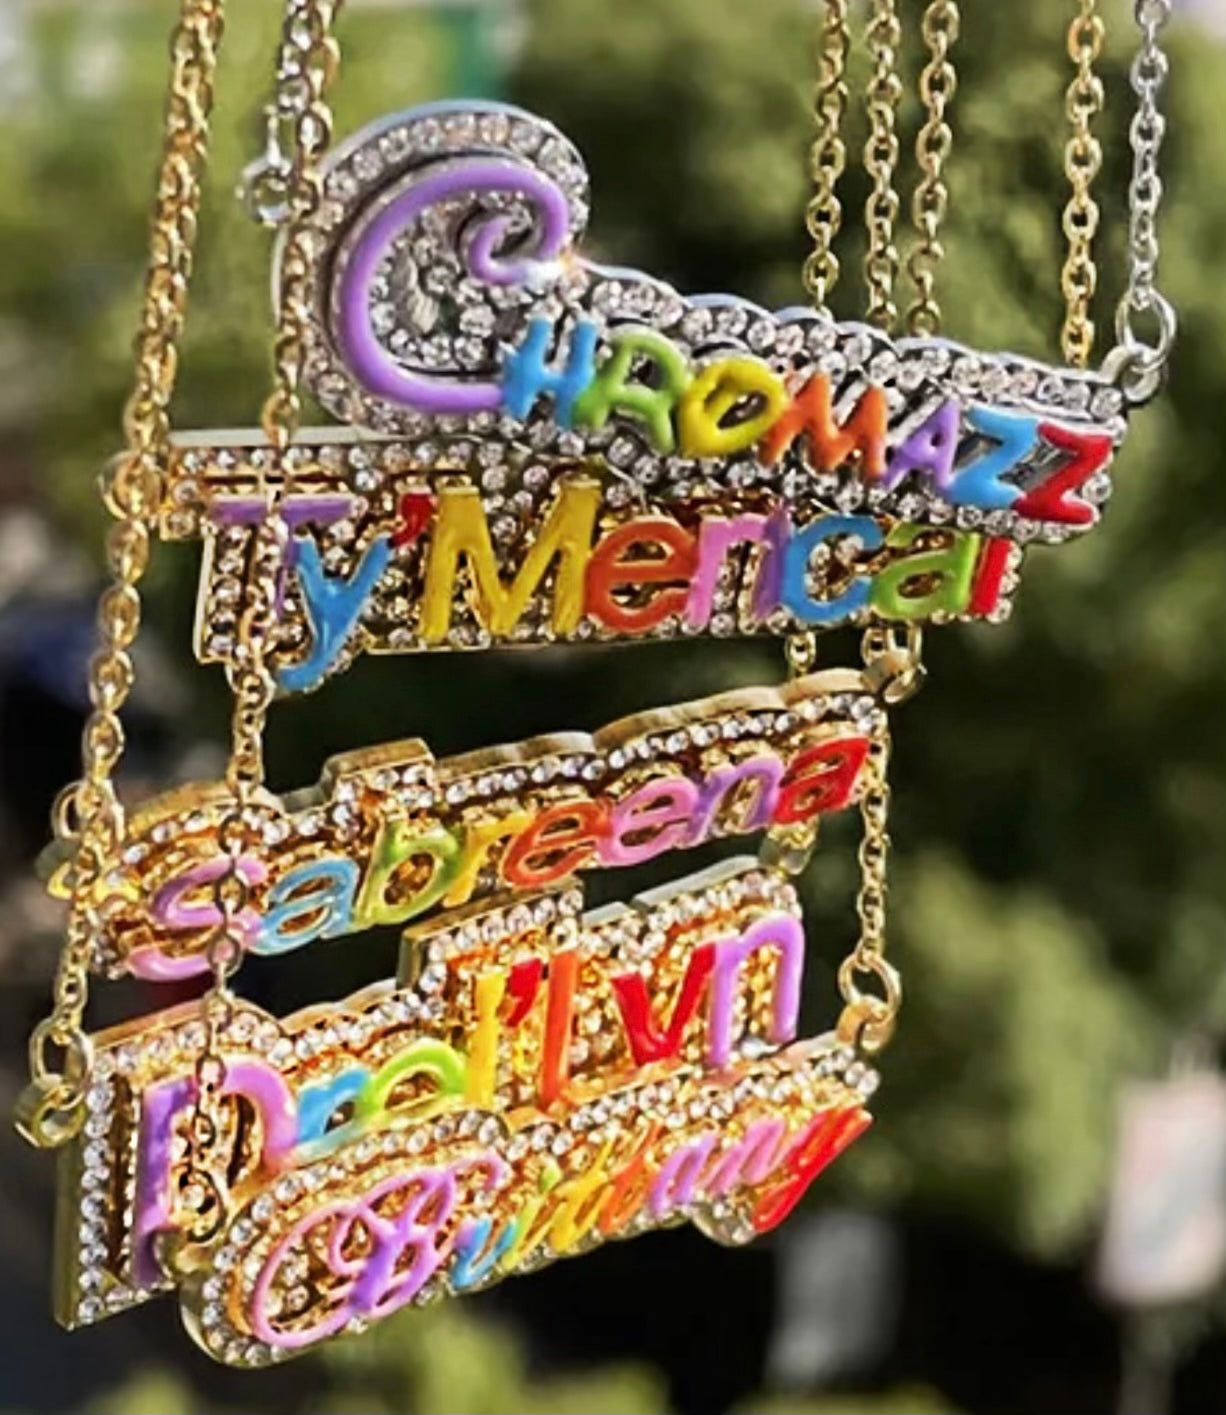 Candy Girl Necklace